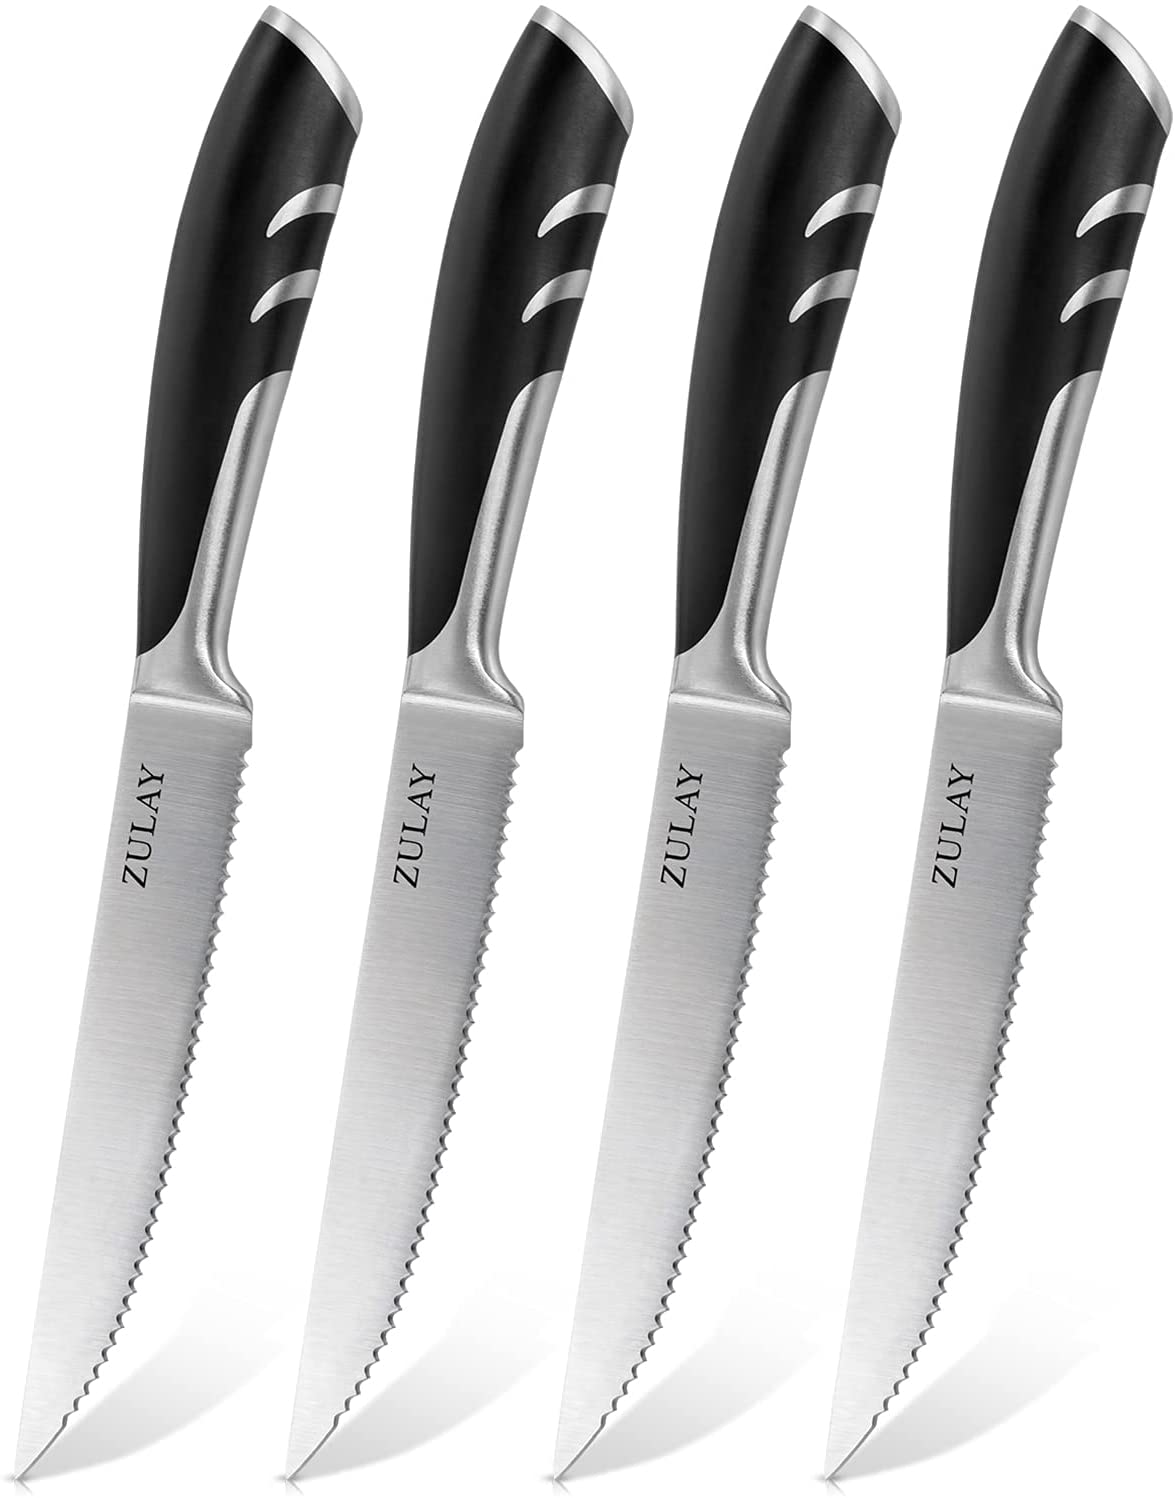 https://www.zulaykitchen.com/cdn/shop/products/steak-knives-set-of-4-5-inch-full-tang-serrated-stainless-steel-steak-knife-set-with-comfortable-non-slip-handlesteak-knives-set-of-4-5-inch-full-tang-serrated--112384.jpg?v=1684848753